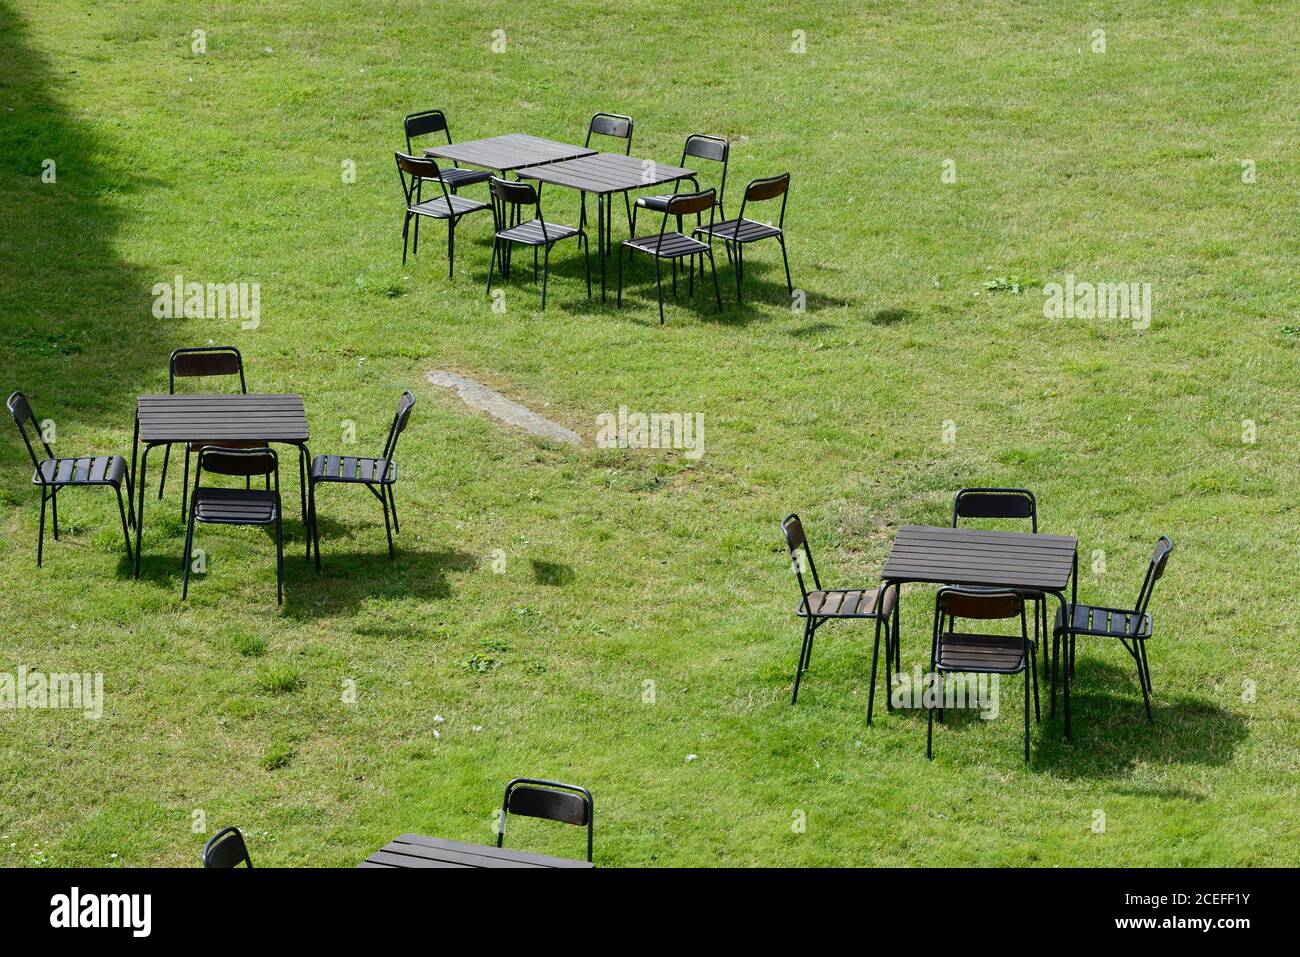 chairs and tables outdoors on a green lawn Stock Photo